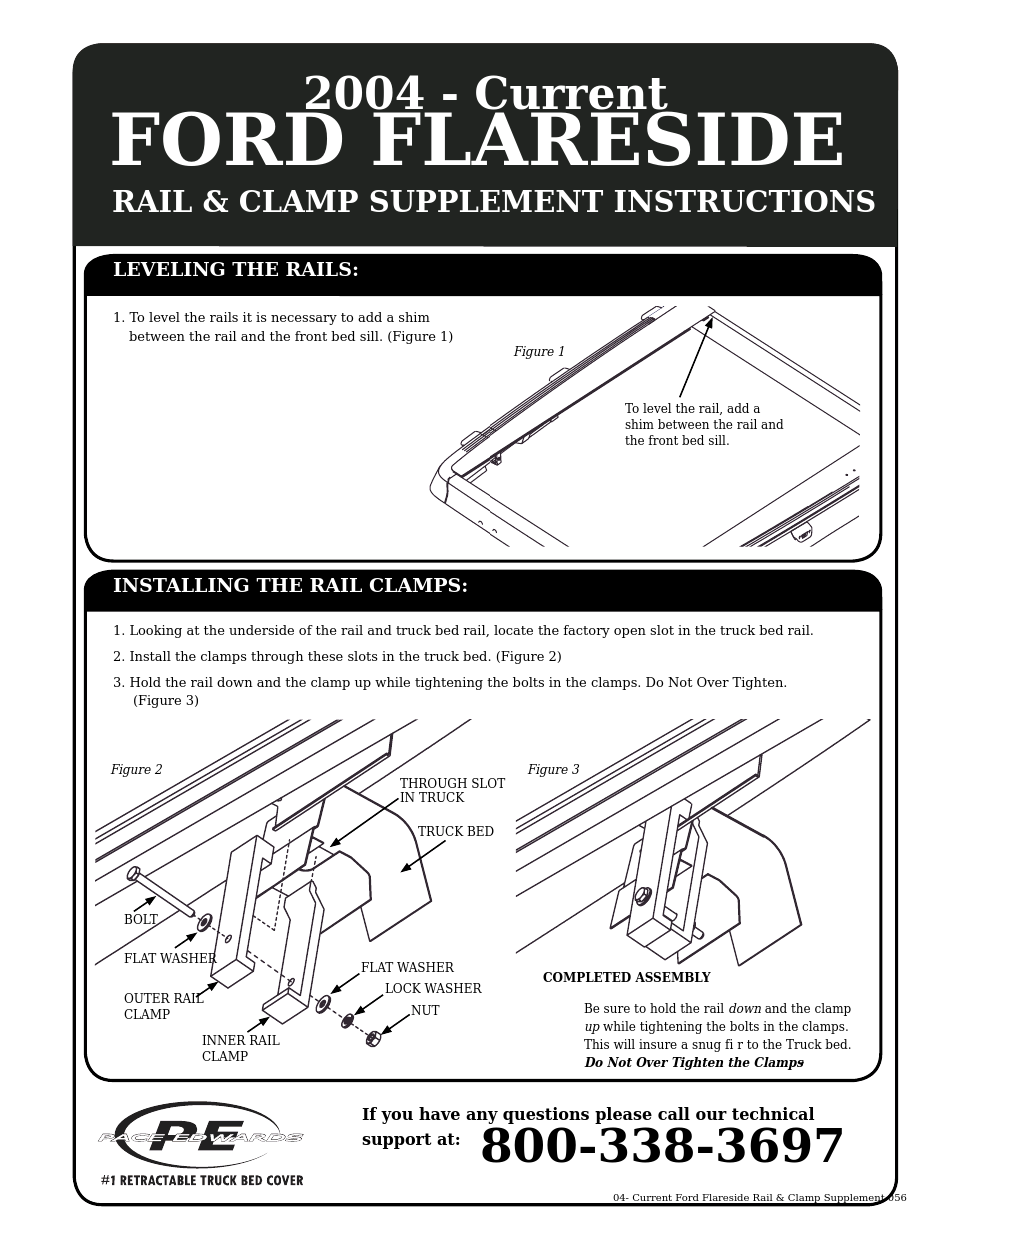 2004-Current BL Ford Flareside Clamp Supplement